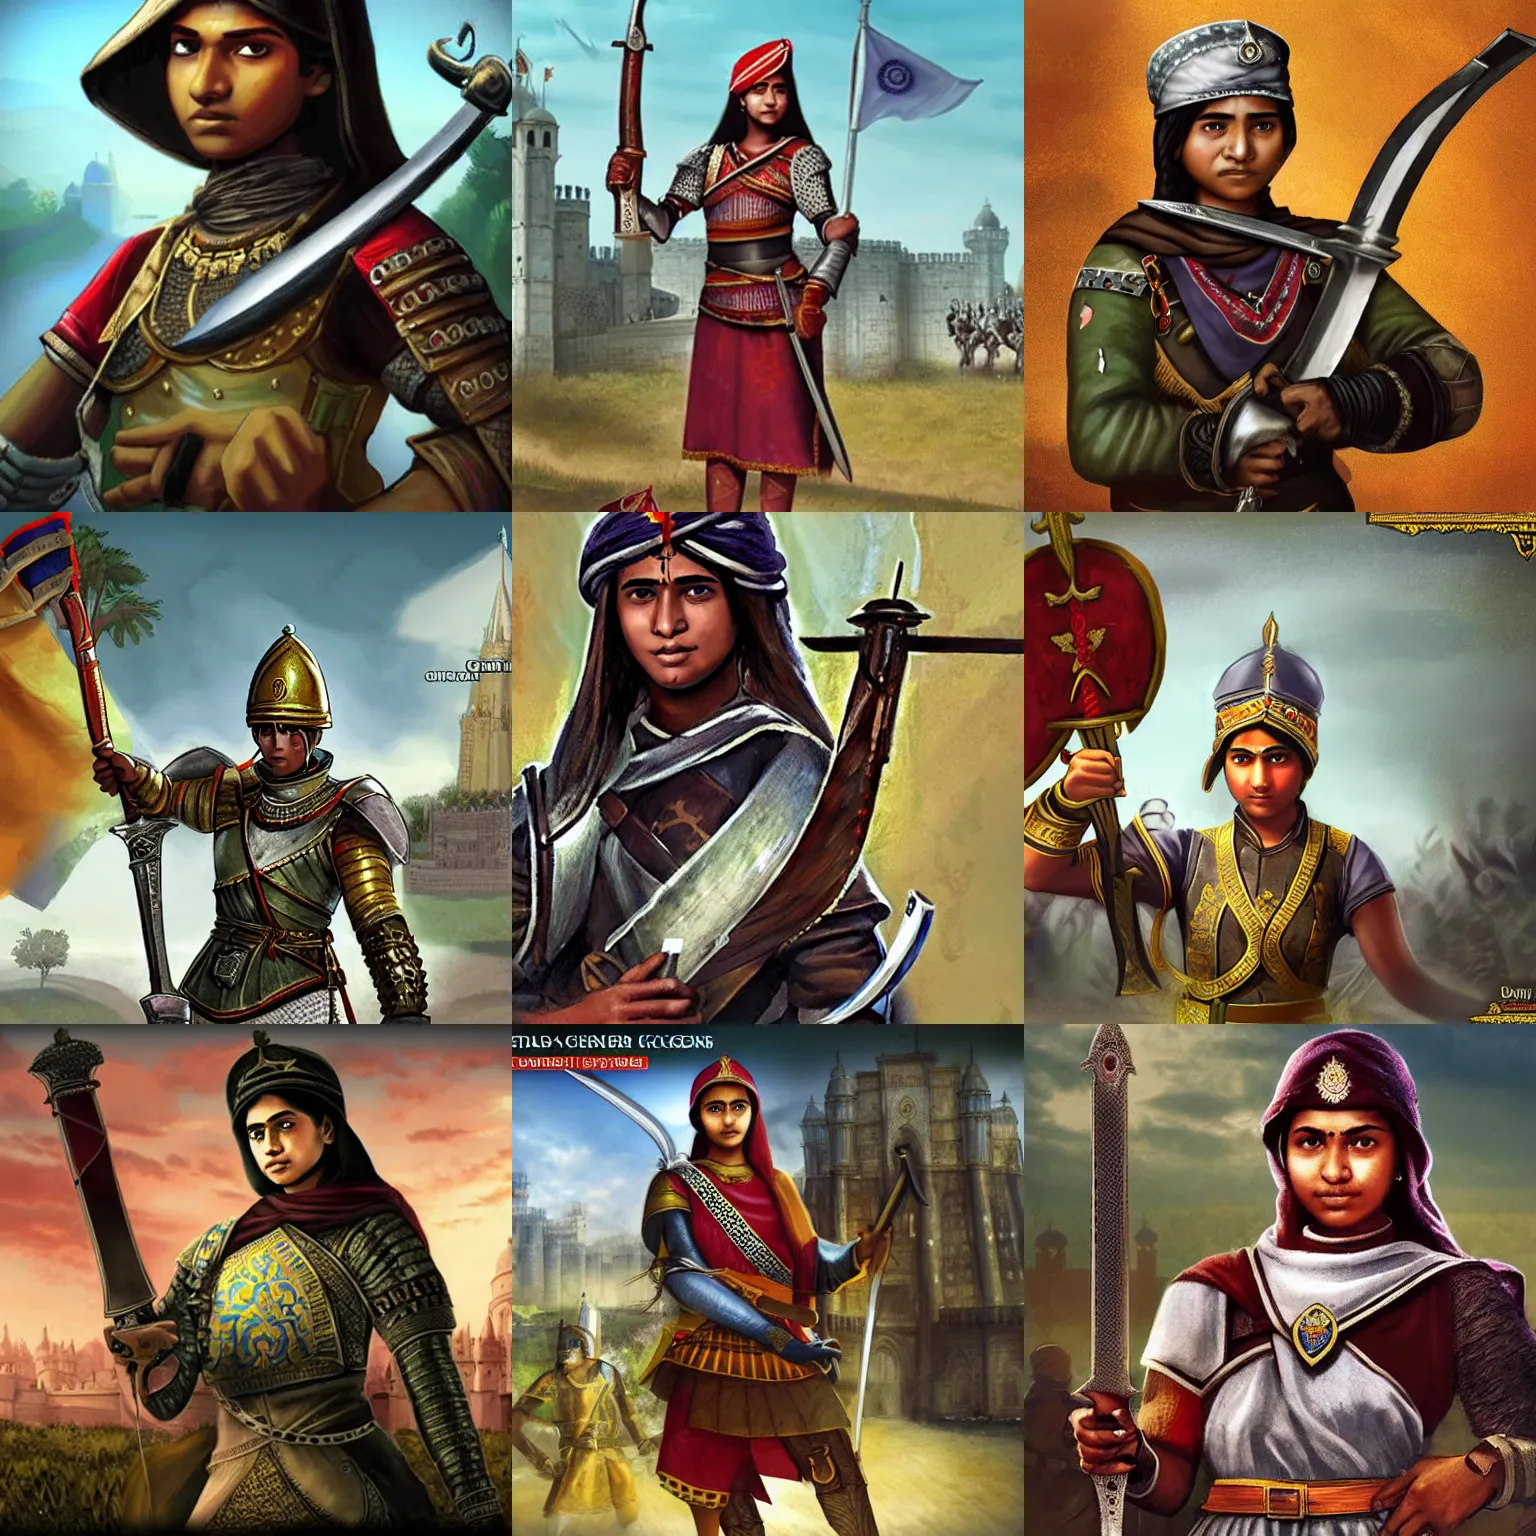 Prompt: A teenage Indian girl soldier, holding a sword, loading screen artwork for the game 'Crusader Kings III'